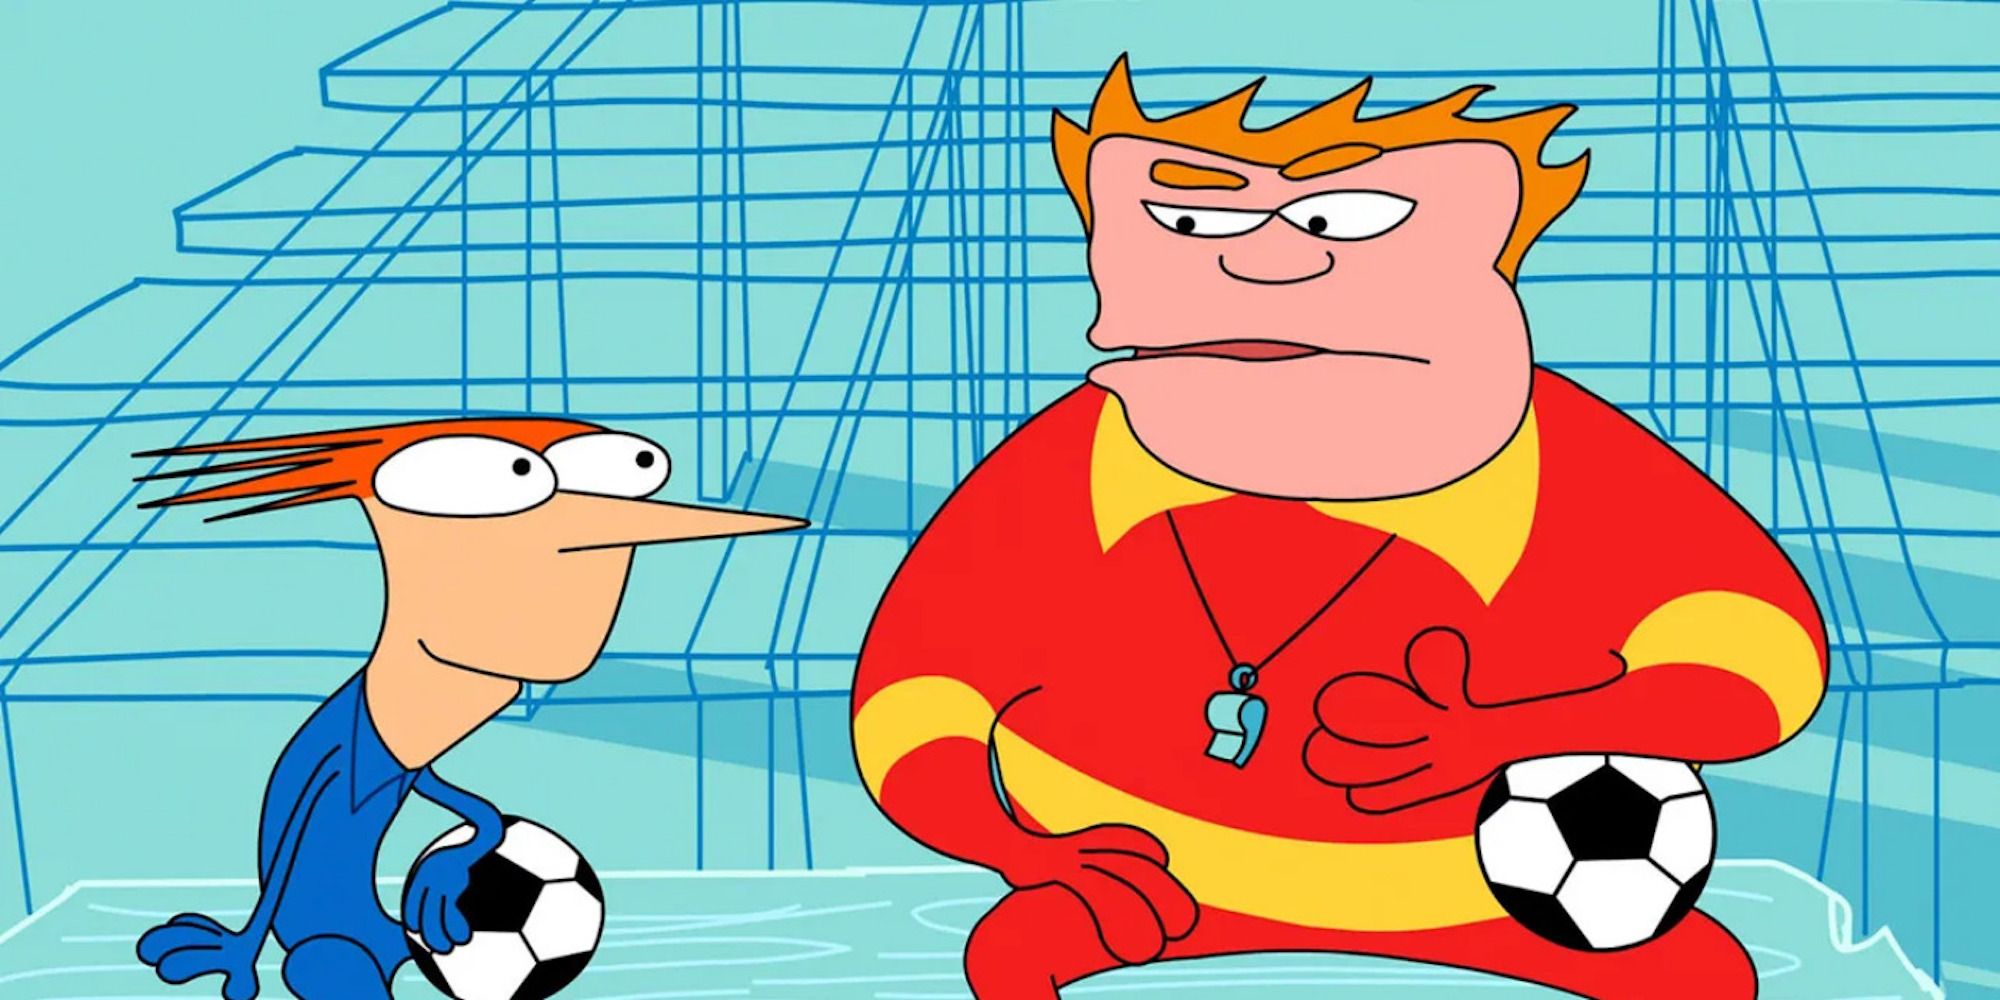 Brendon and Coach McGuirk from Home Movies